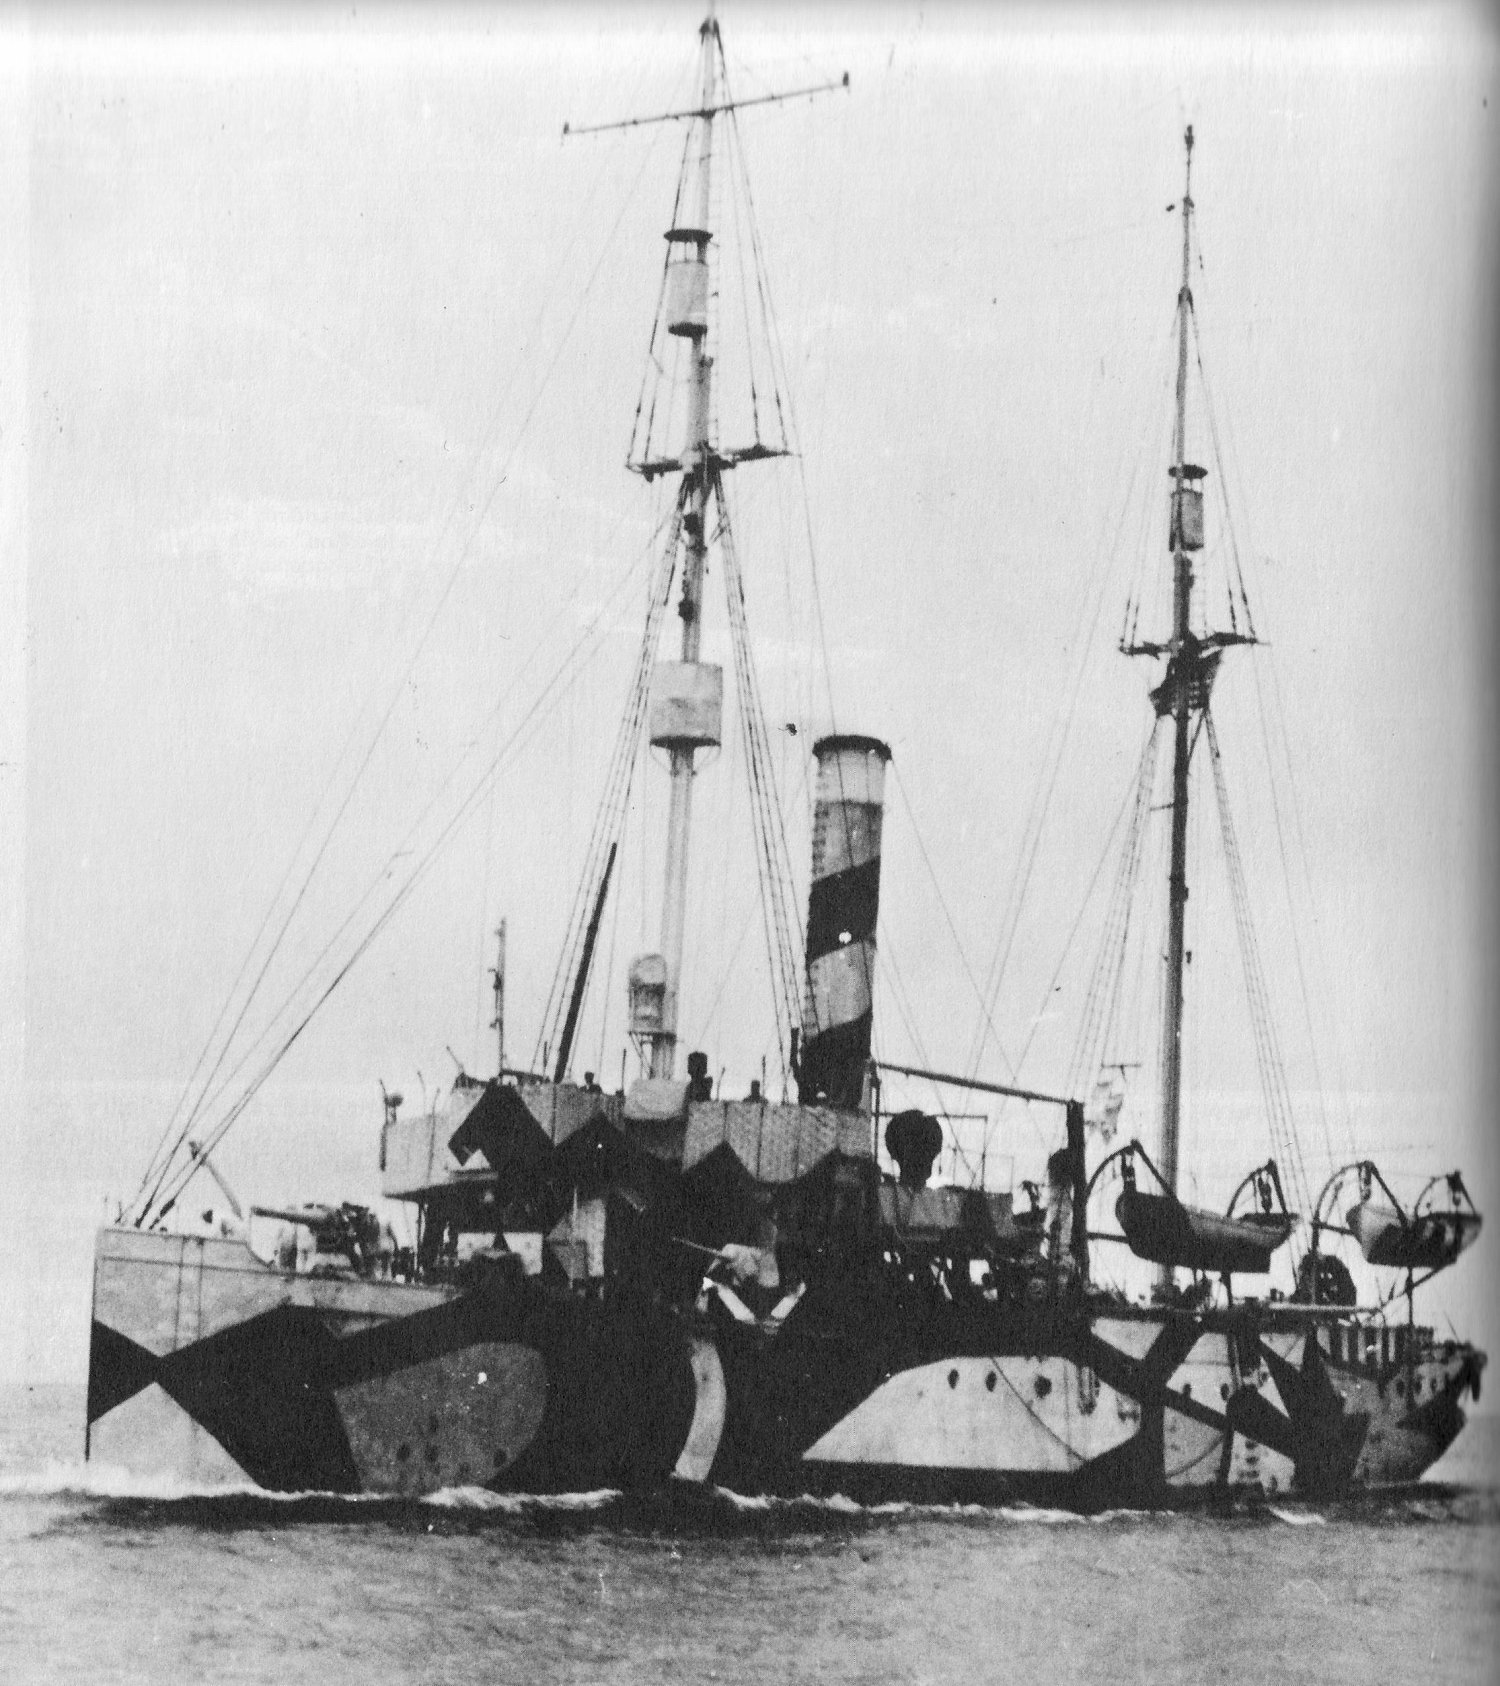 The Navy-manned gunboat USS Marietta, which Hamlet commanded in World War I during the infamous Navy convoy from Brest, France (Courtesy of Naval History and Heritage Command)